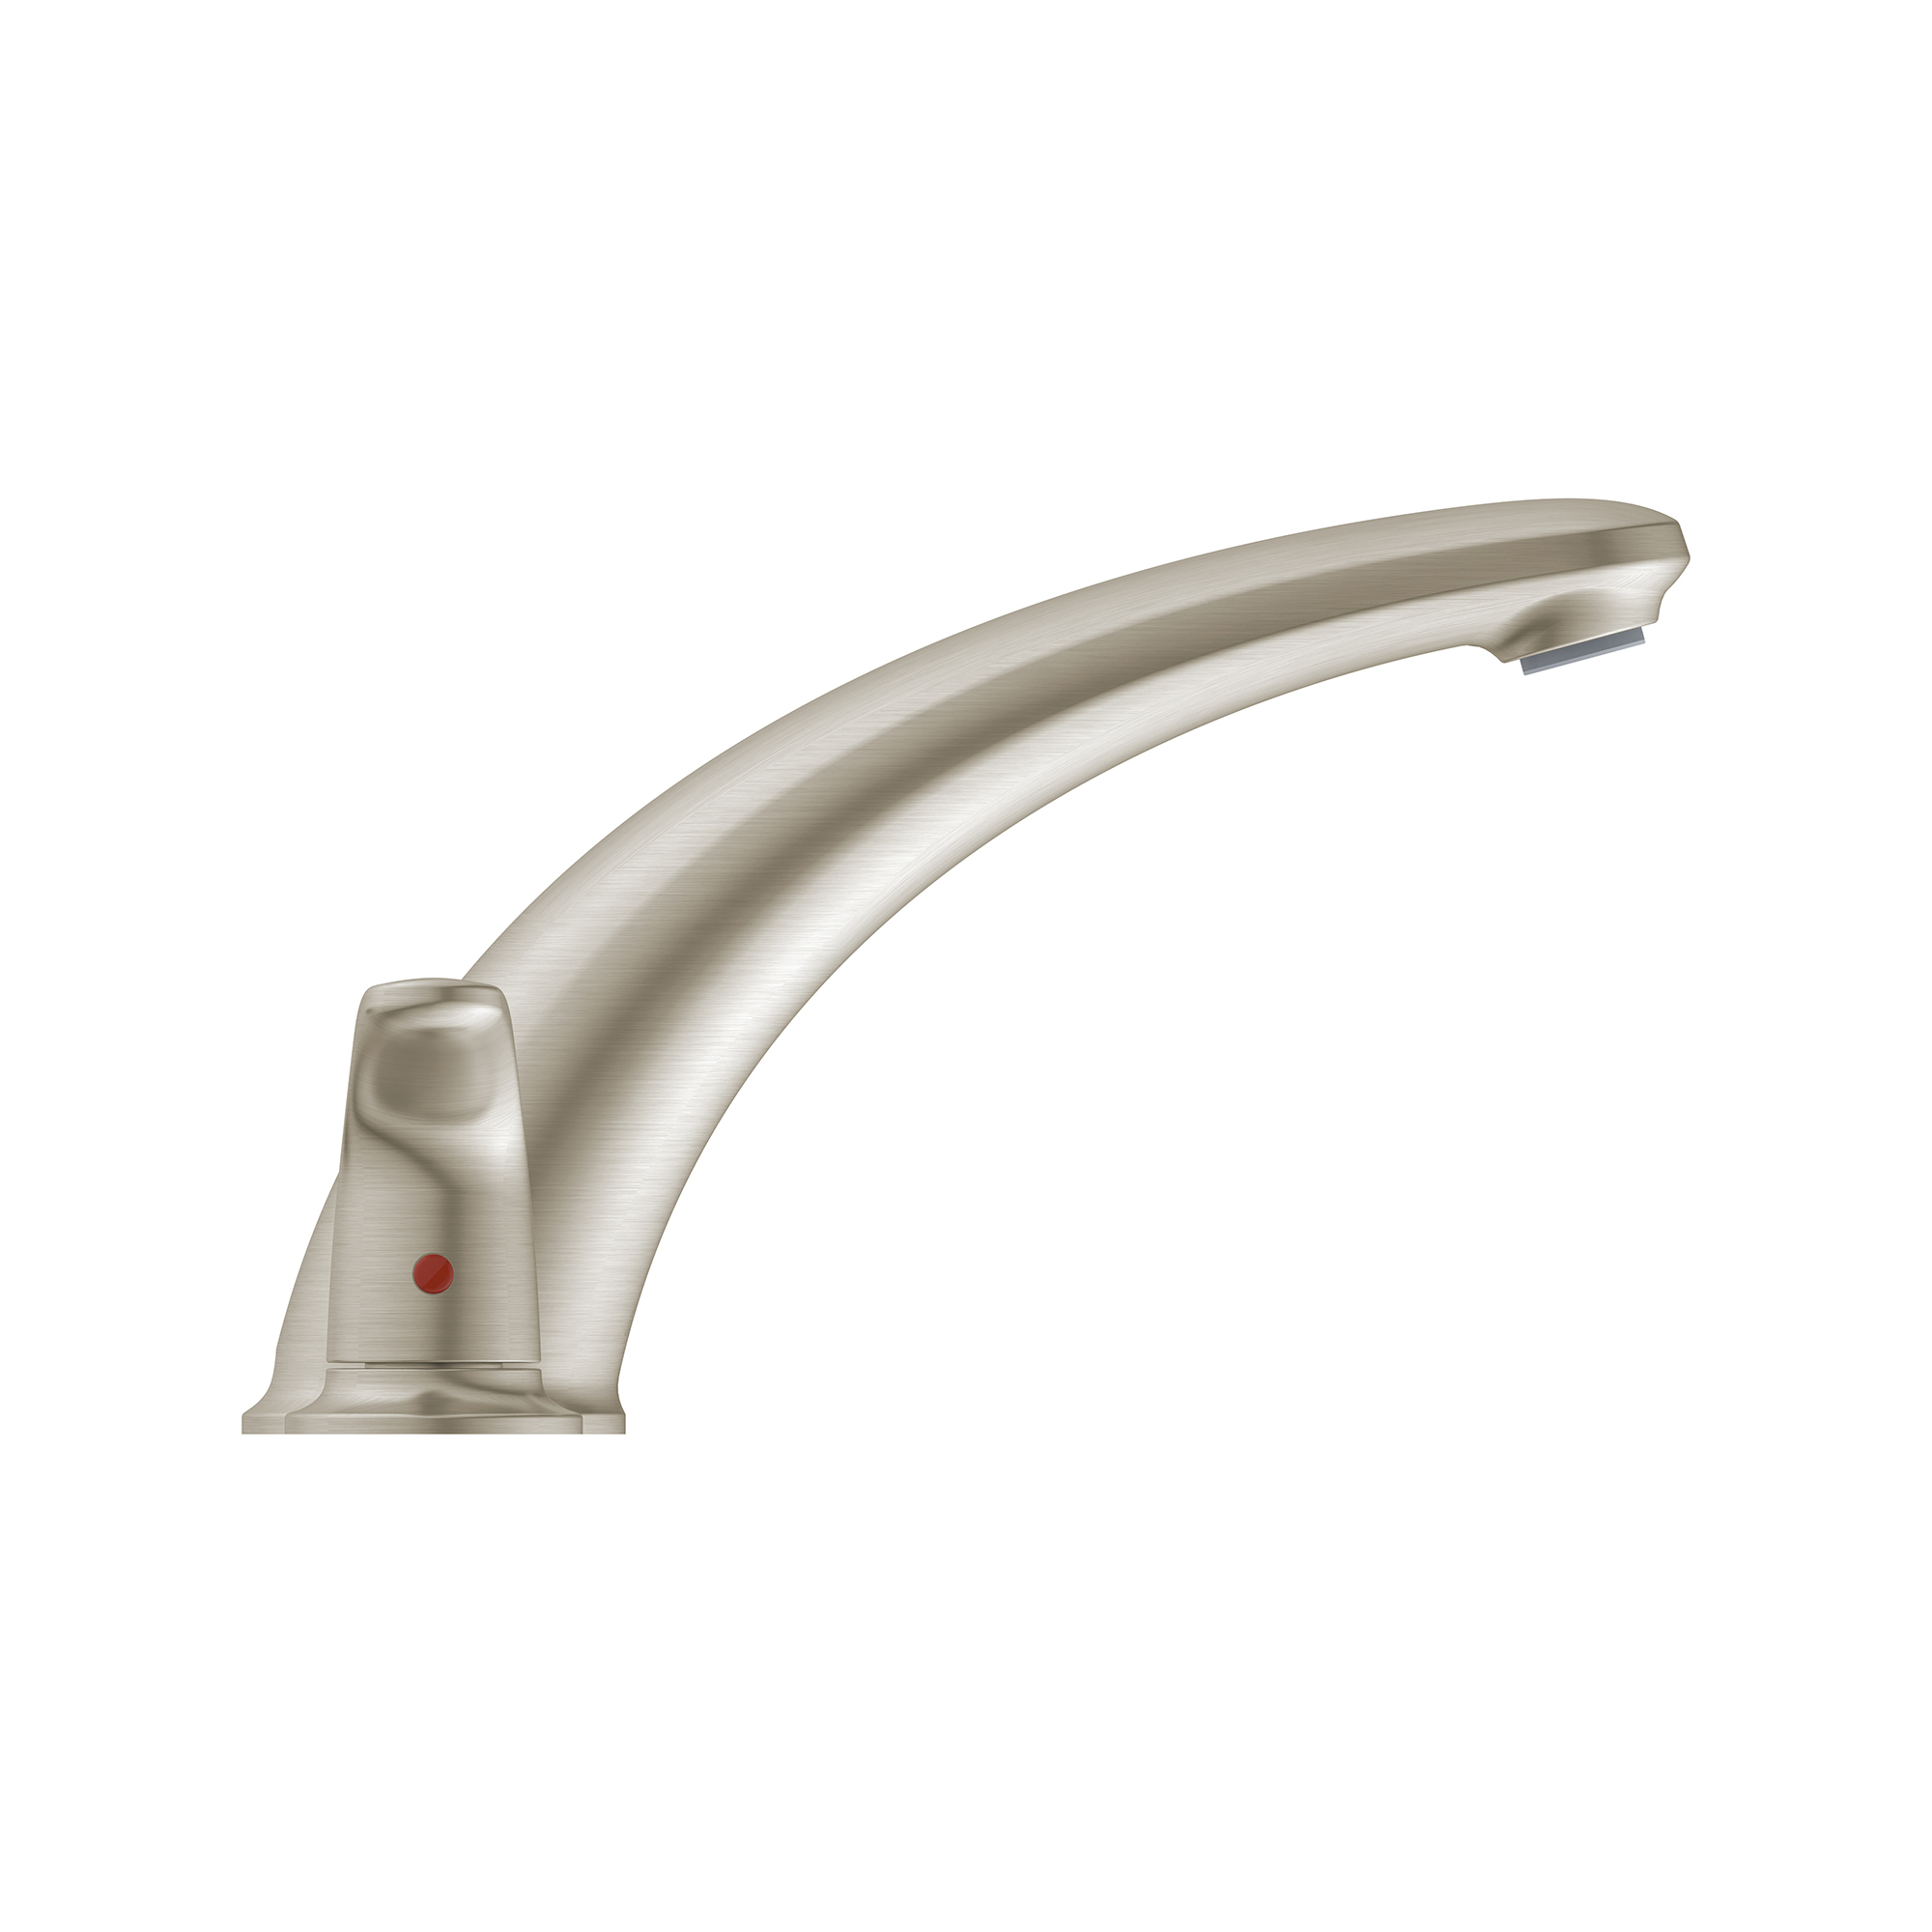 Colony™ PRO Bathtub Faucet Trim With Lever Handles for Flash™ Rough-In Valve